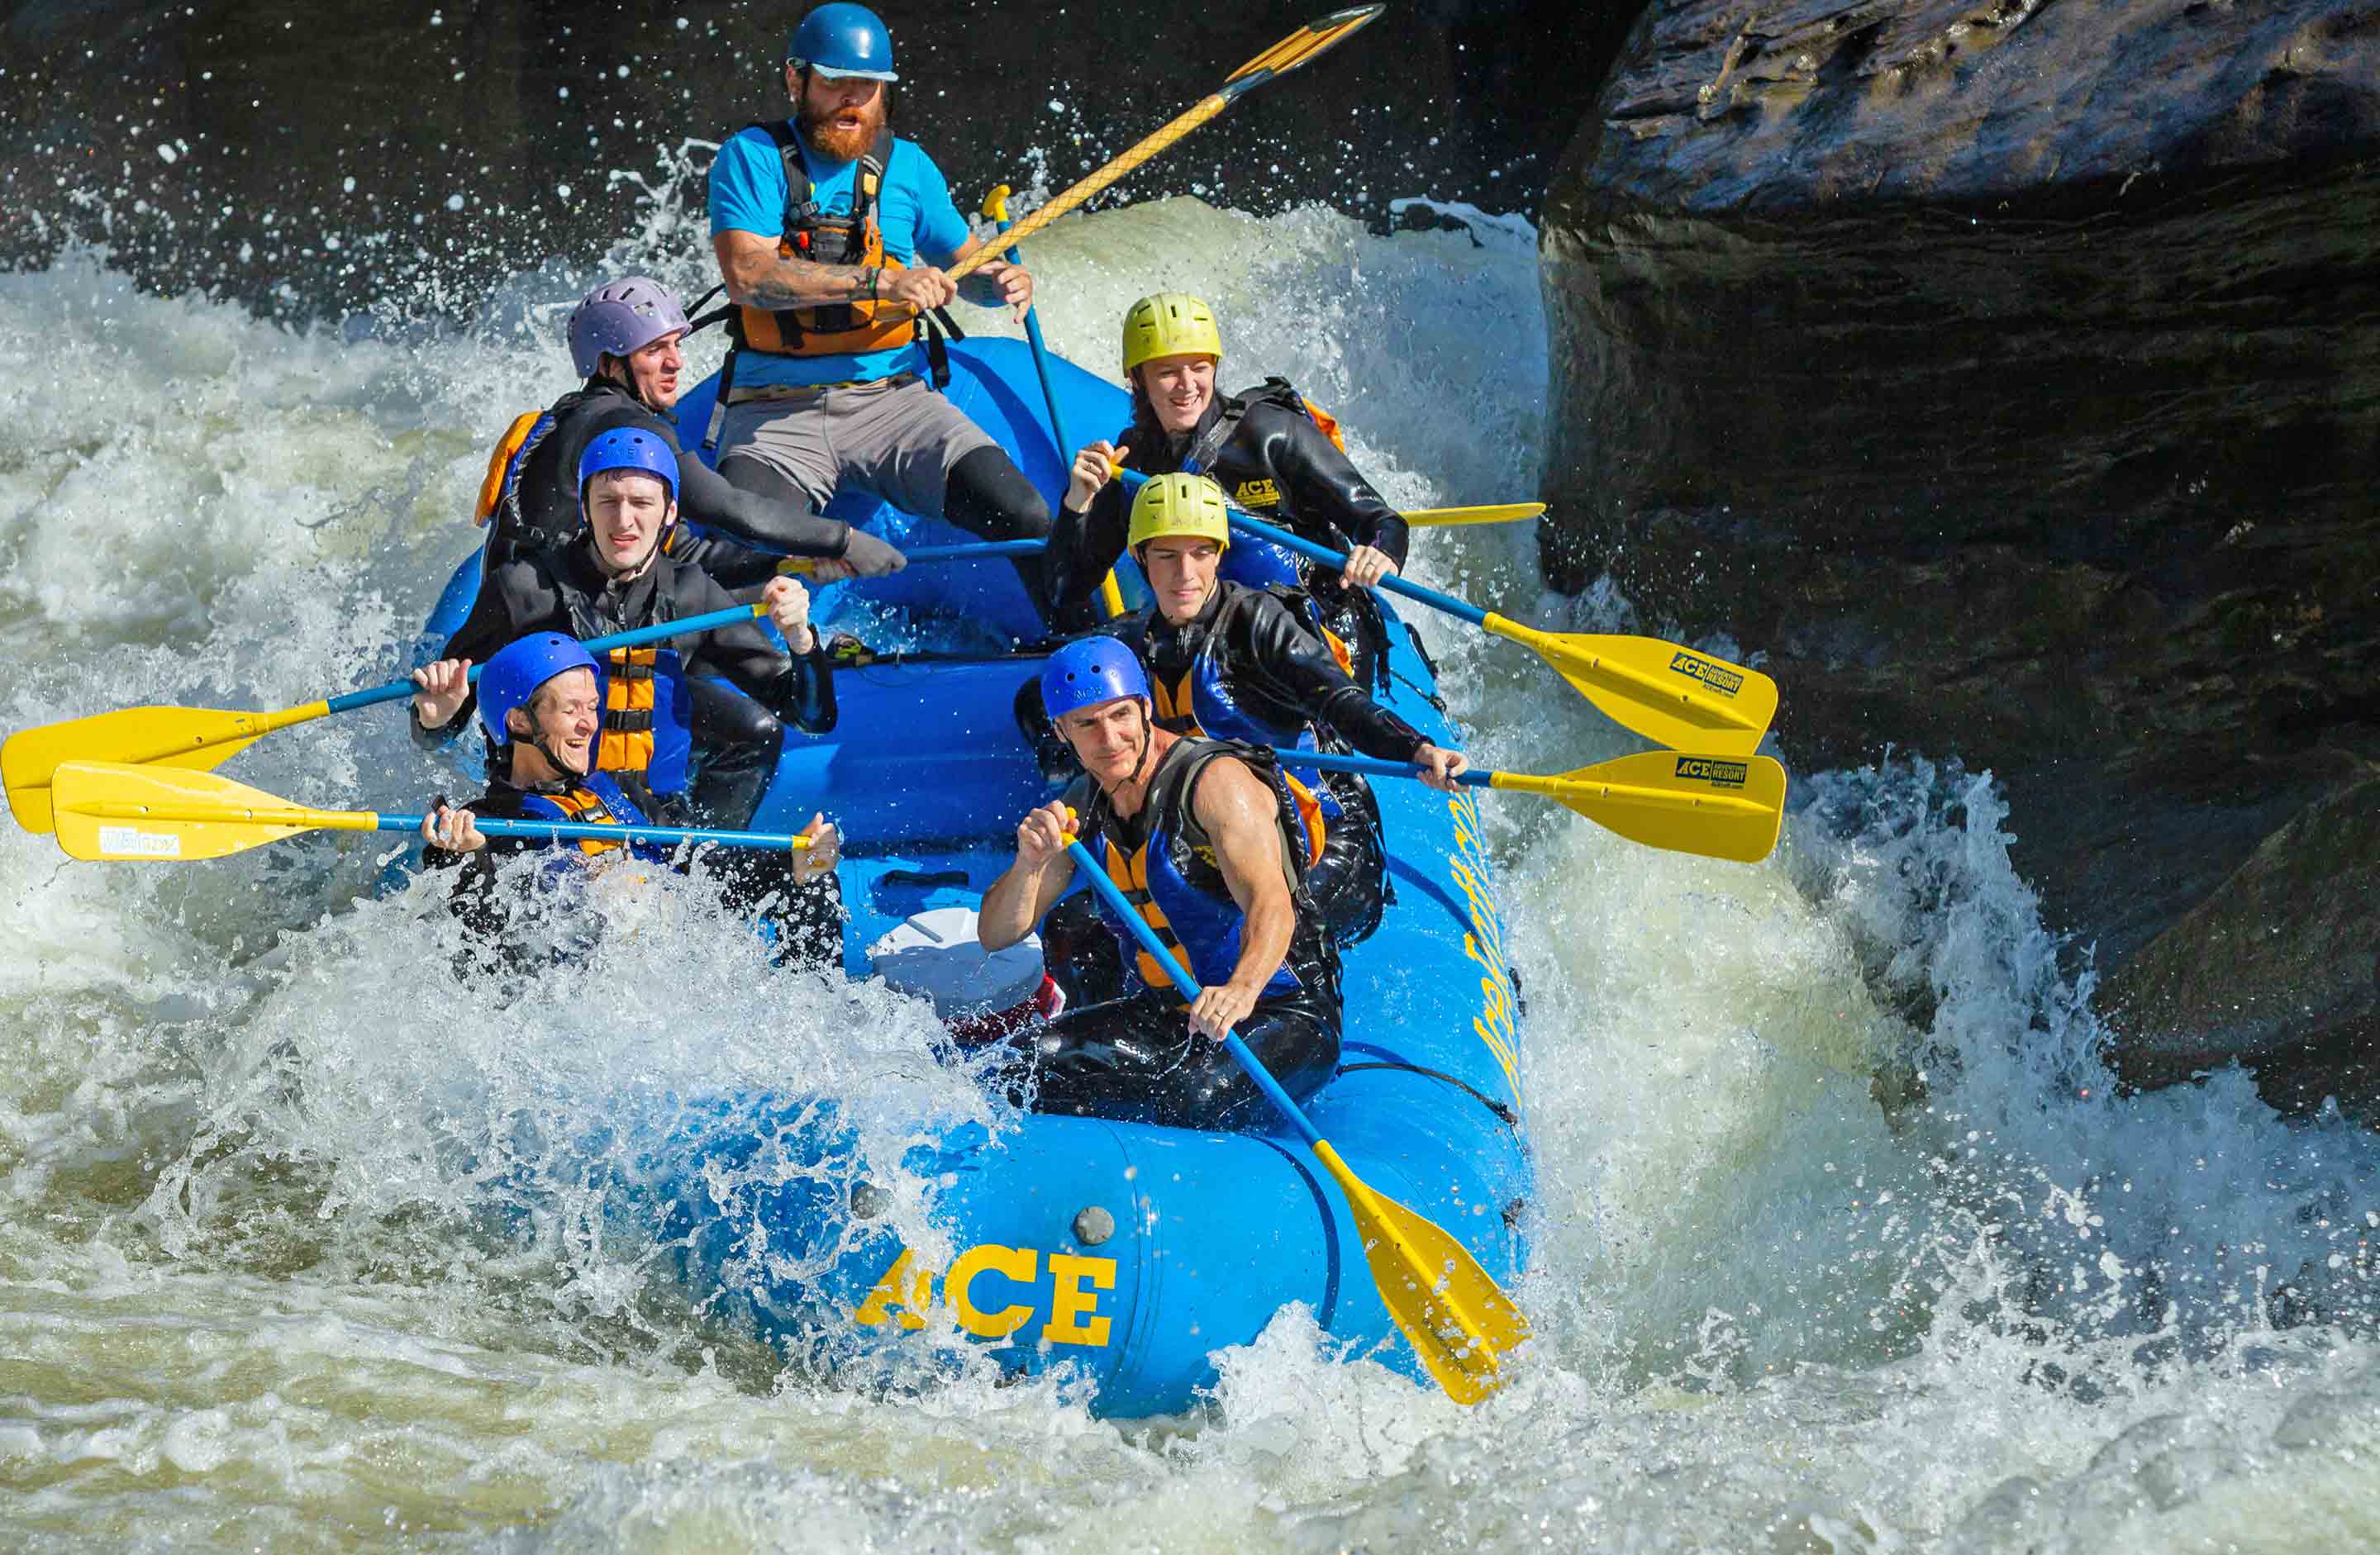 Rafting Pillow Rock rapid on the Upper Gauley RIver on a guided white water tour with ACE.